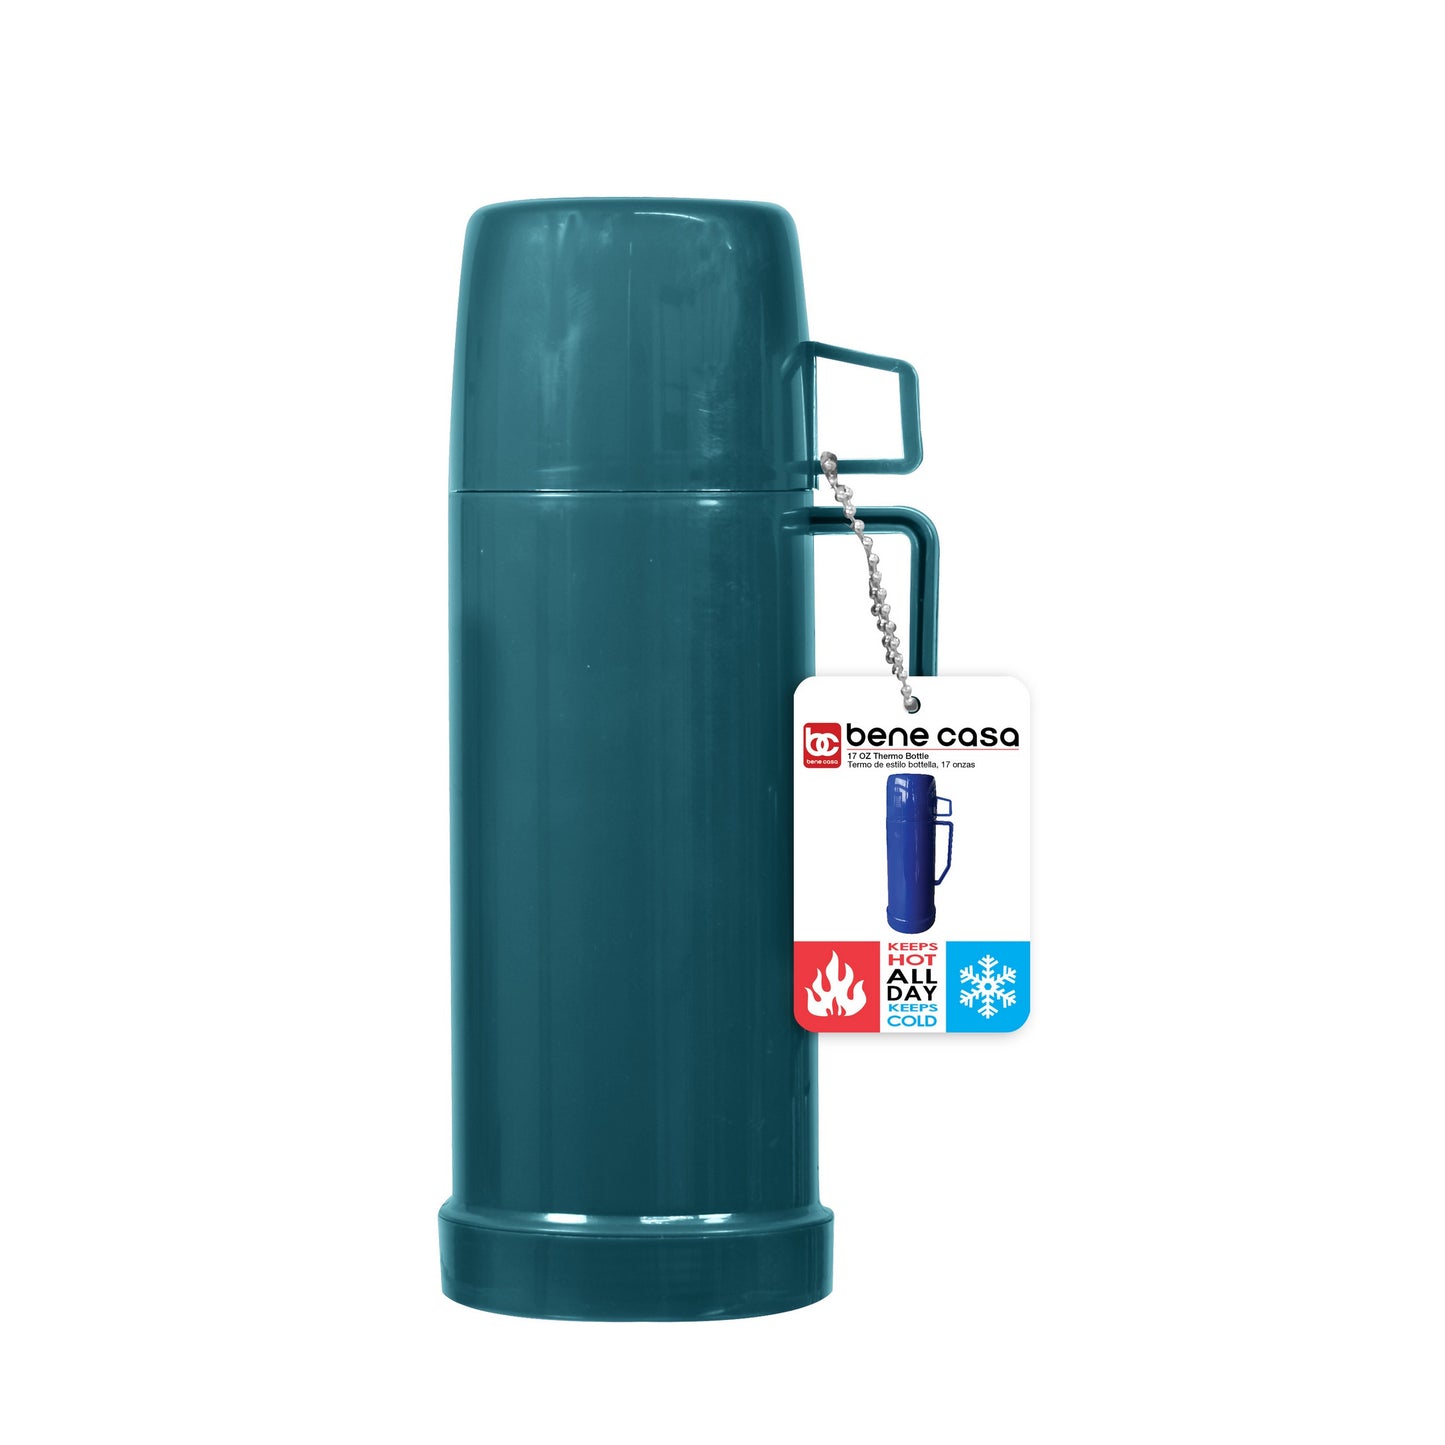 Large Capacity Household Air Pressure Stainless Thermos Thermal